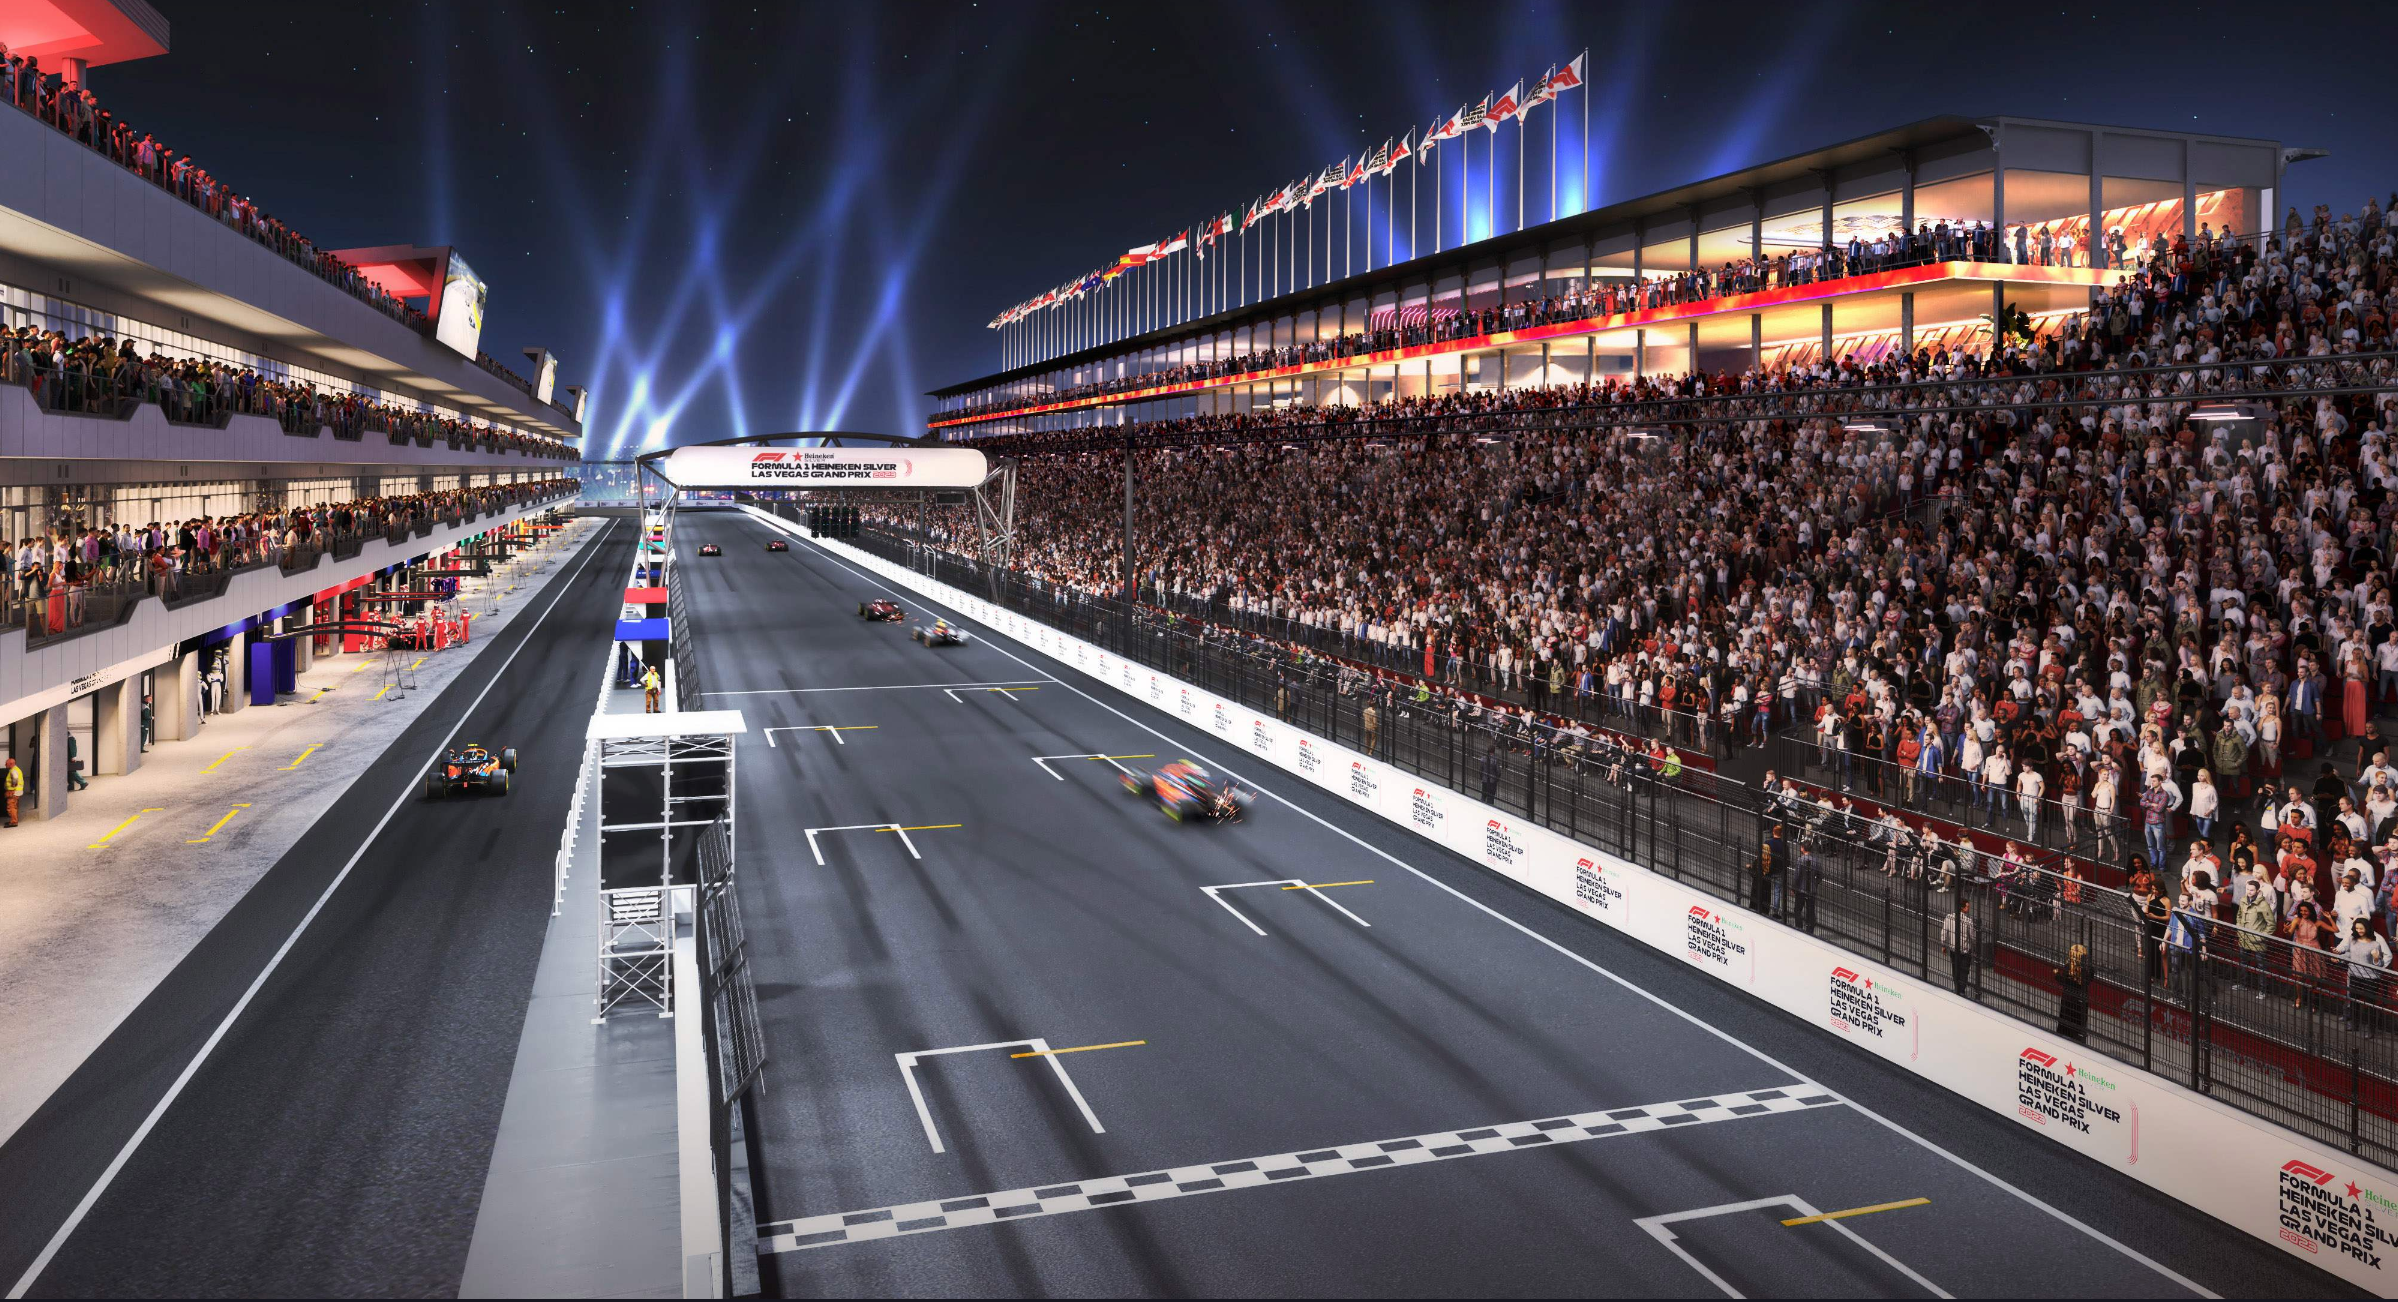 New images have been revealed of what the Las Vegas Grand Prix will look like in November